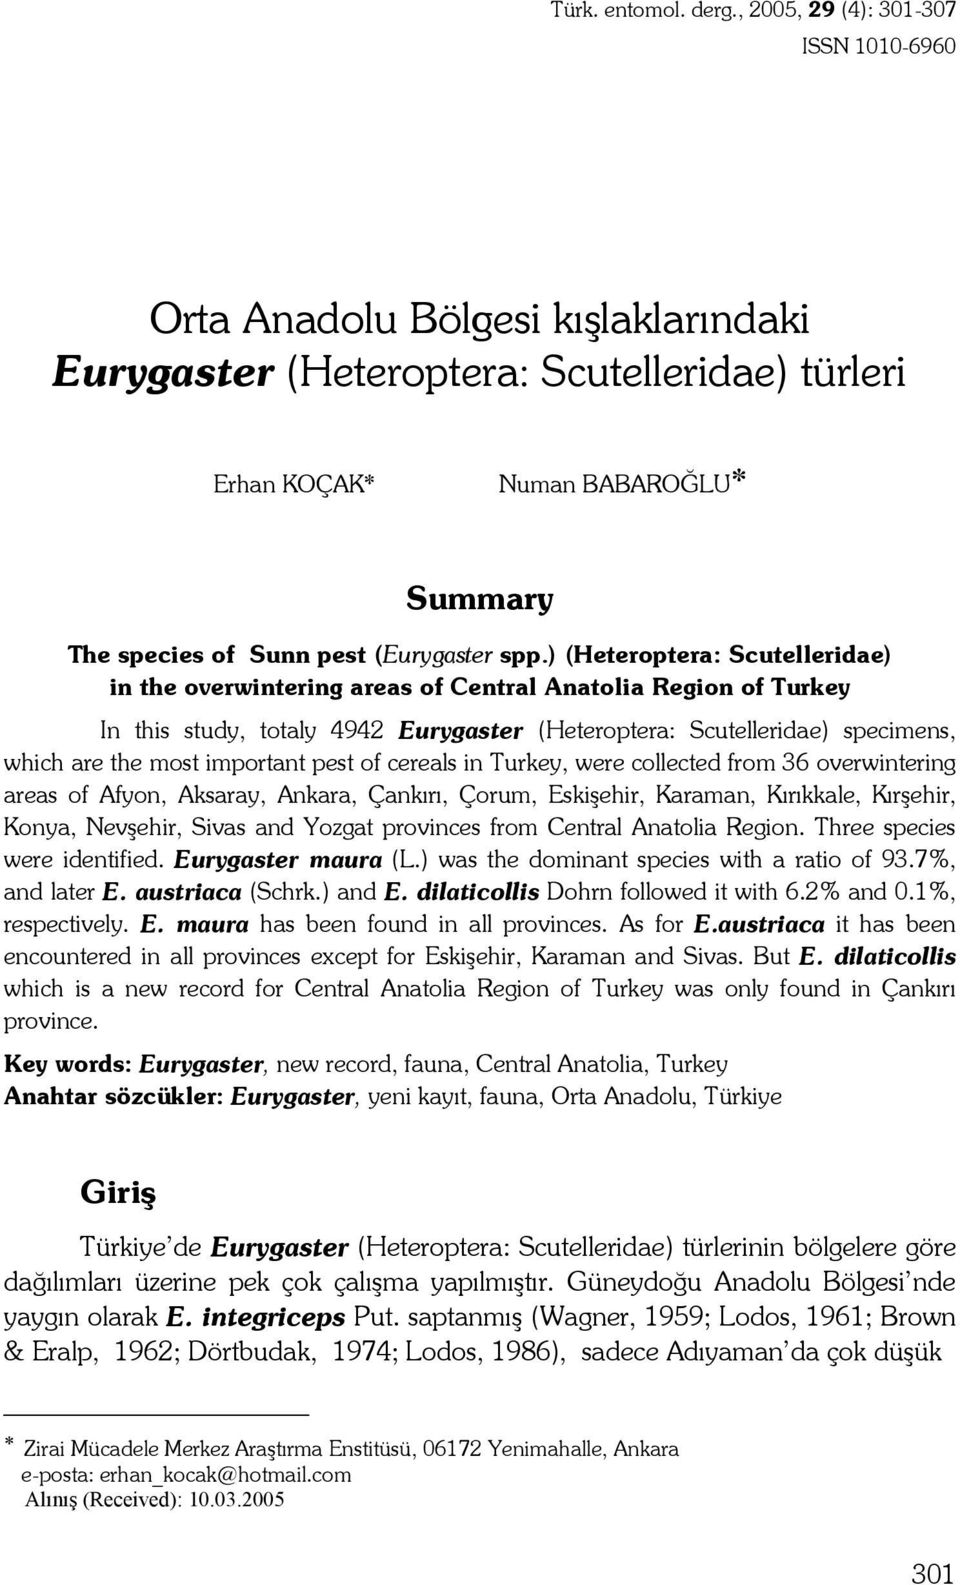 ) (Heteroptera: Scutelleridae) in the overwintering areas of Central Anatolia Region of Turkey In this study, totaly 9 Eurygaster (Heteroptera: Scutelleridae) specimens, which are the most important